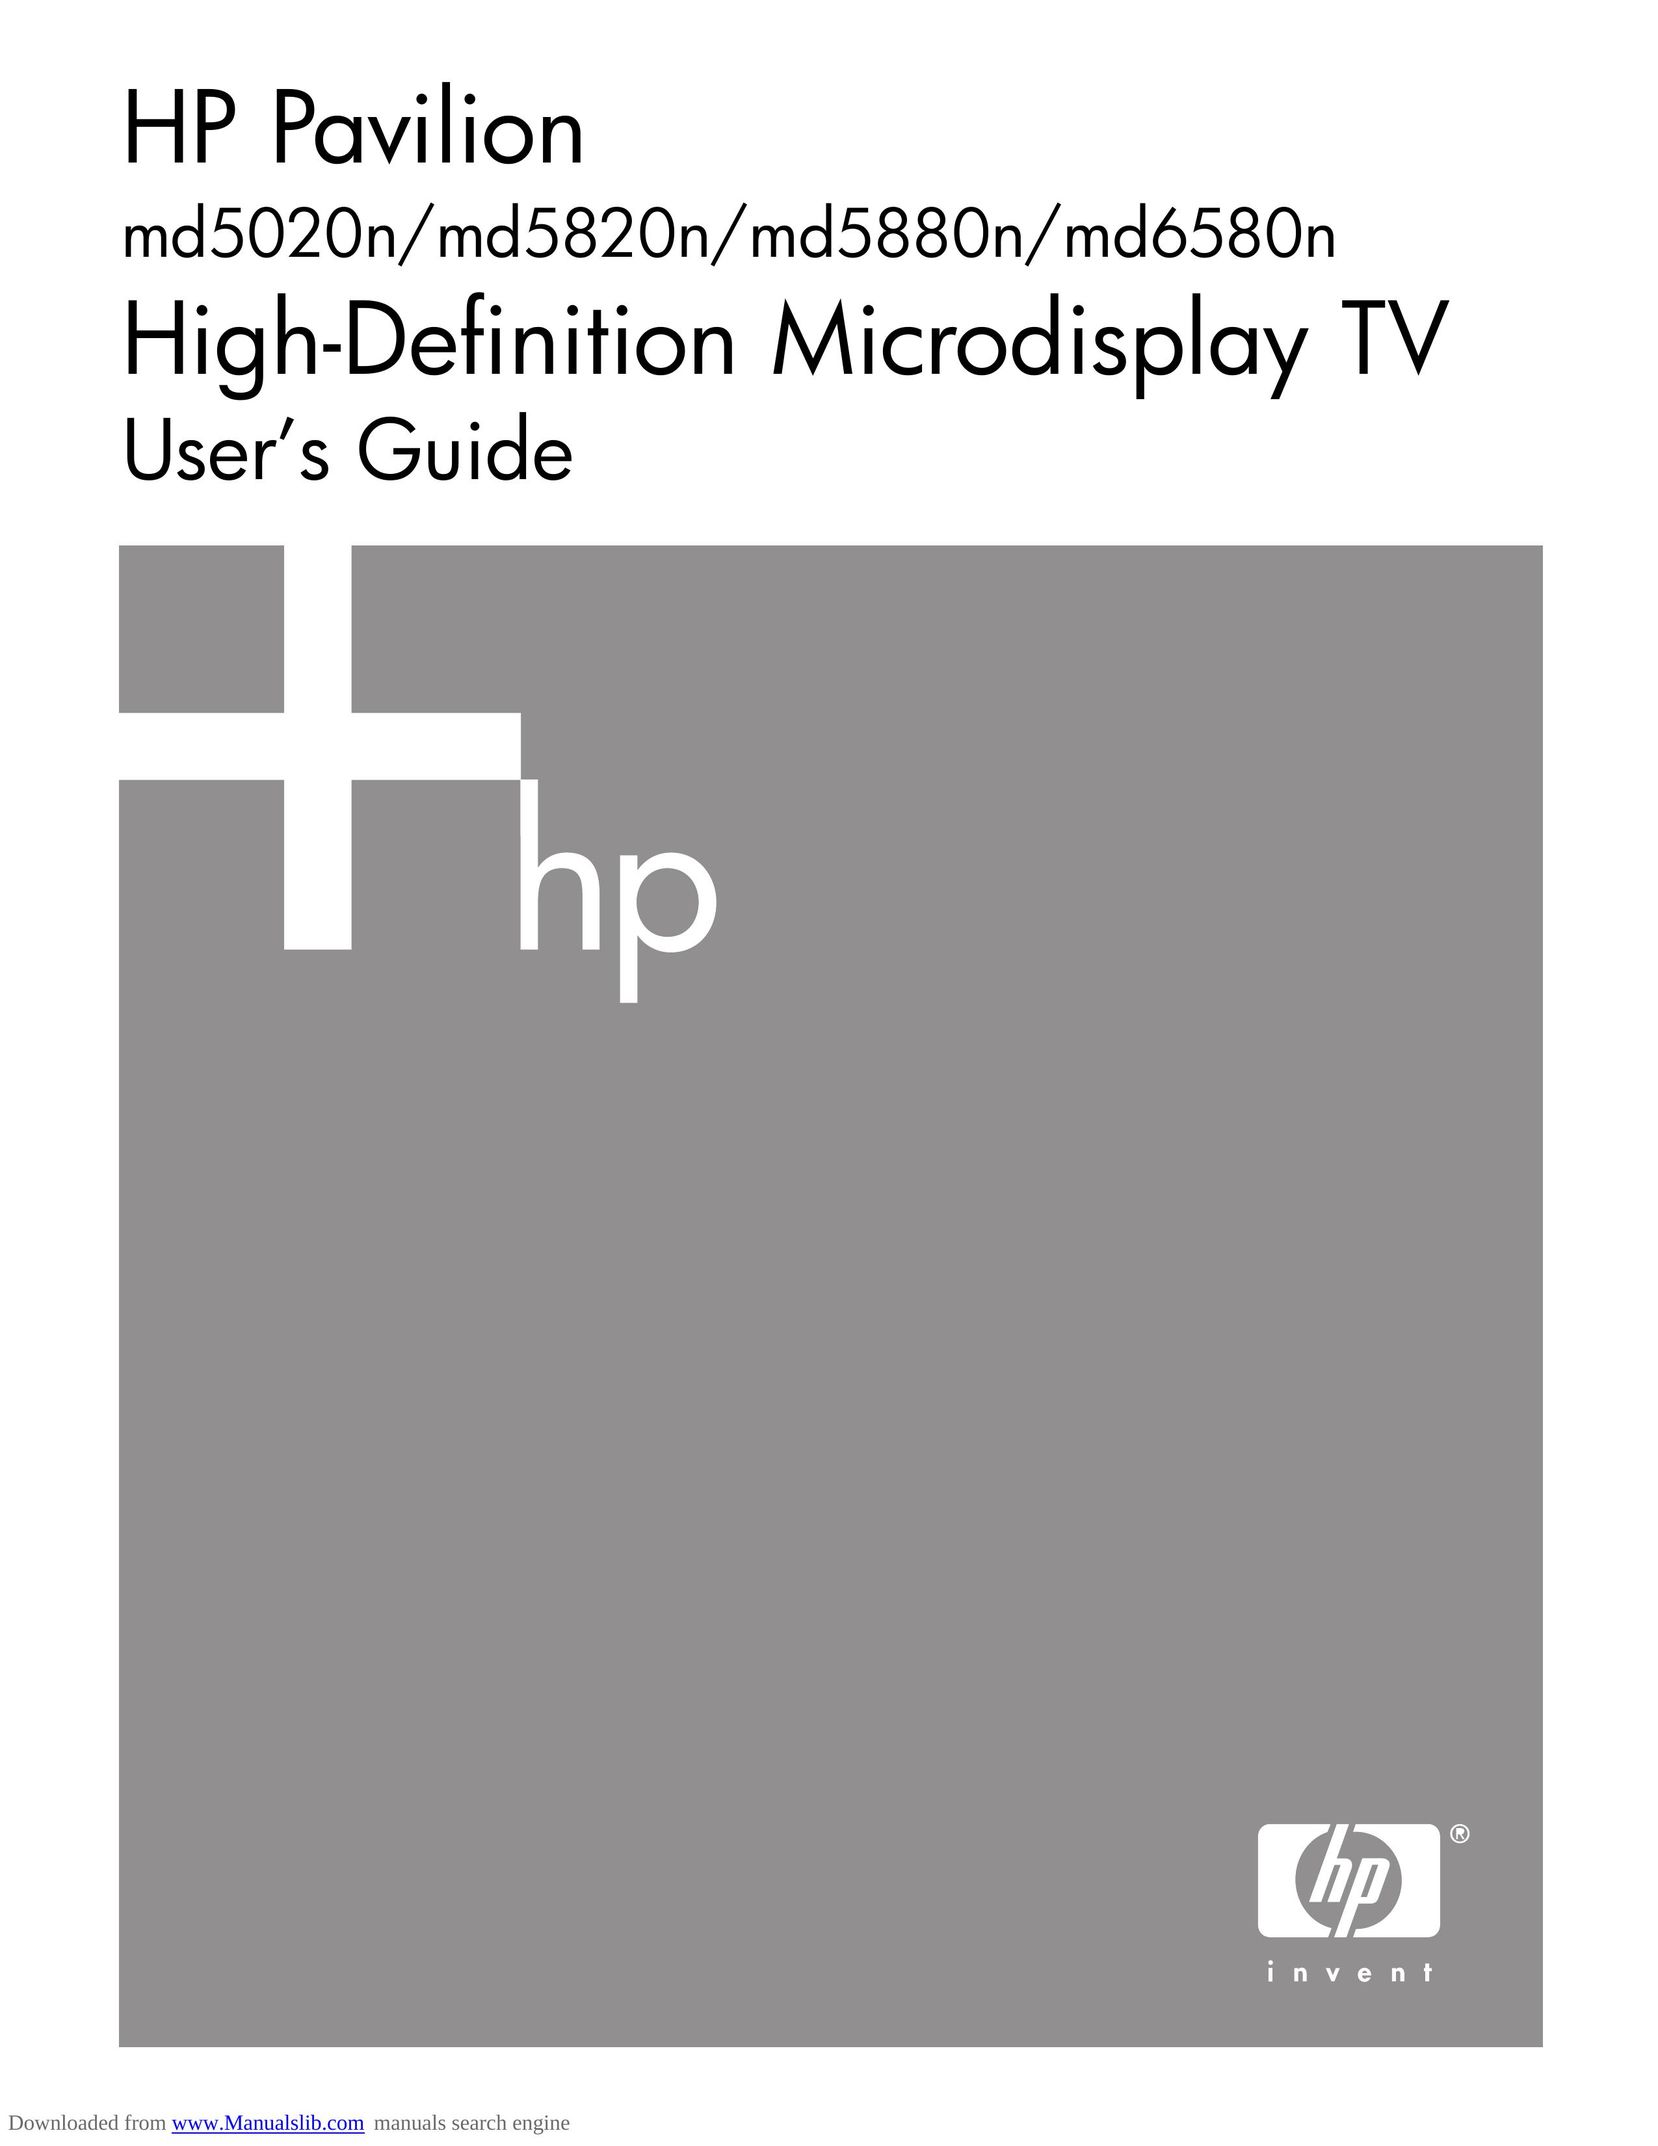 HP (Hewlett-Packard) MD5880N Projection Television User Manual